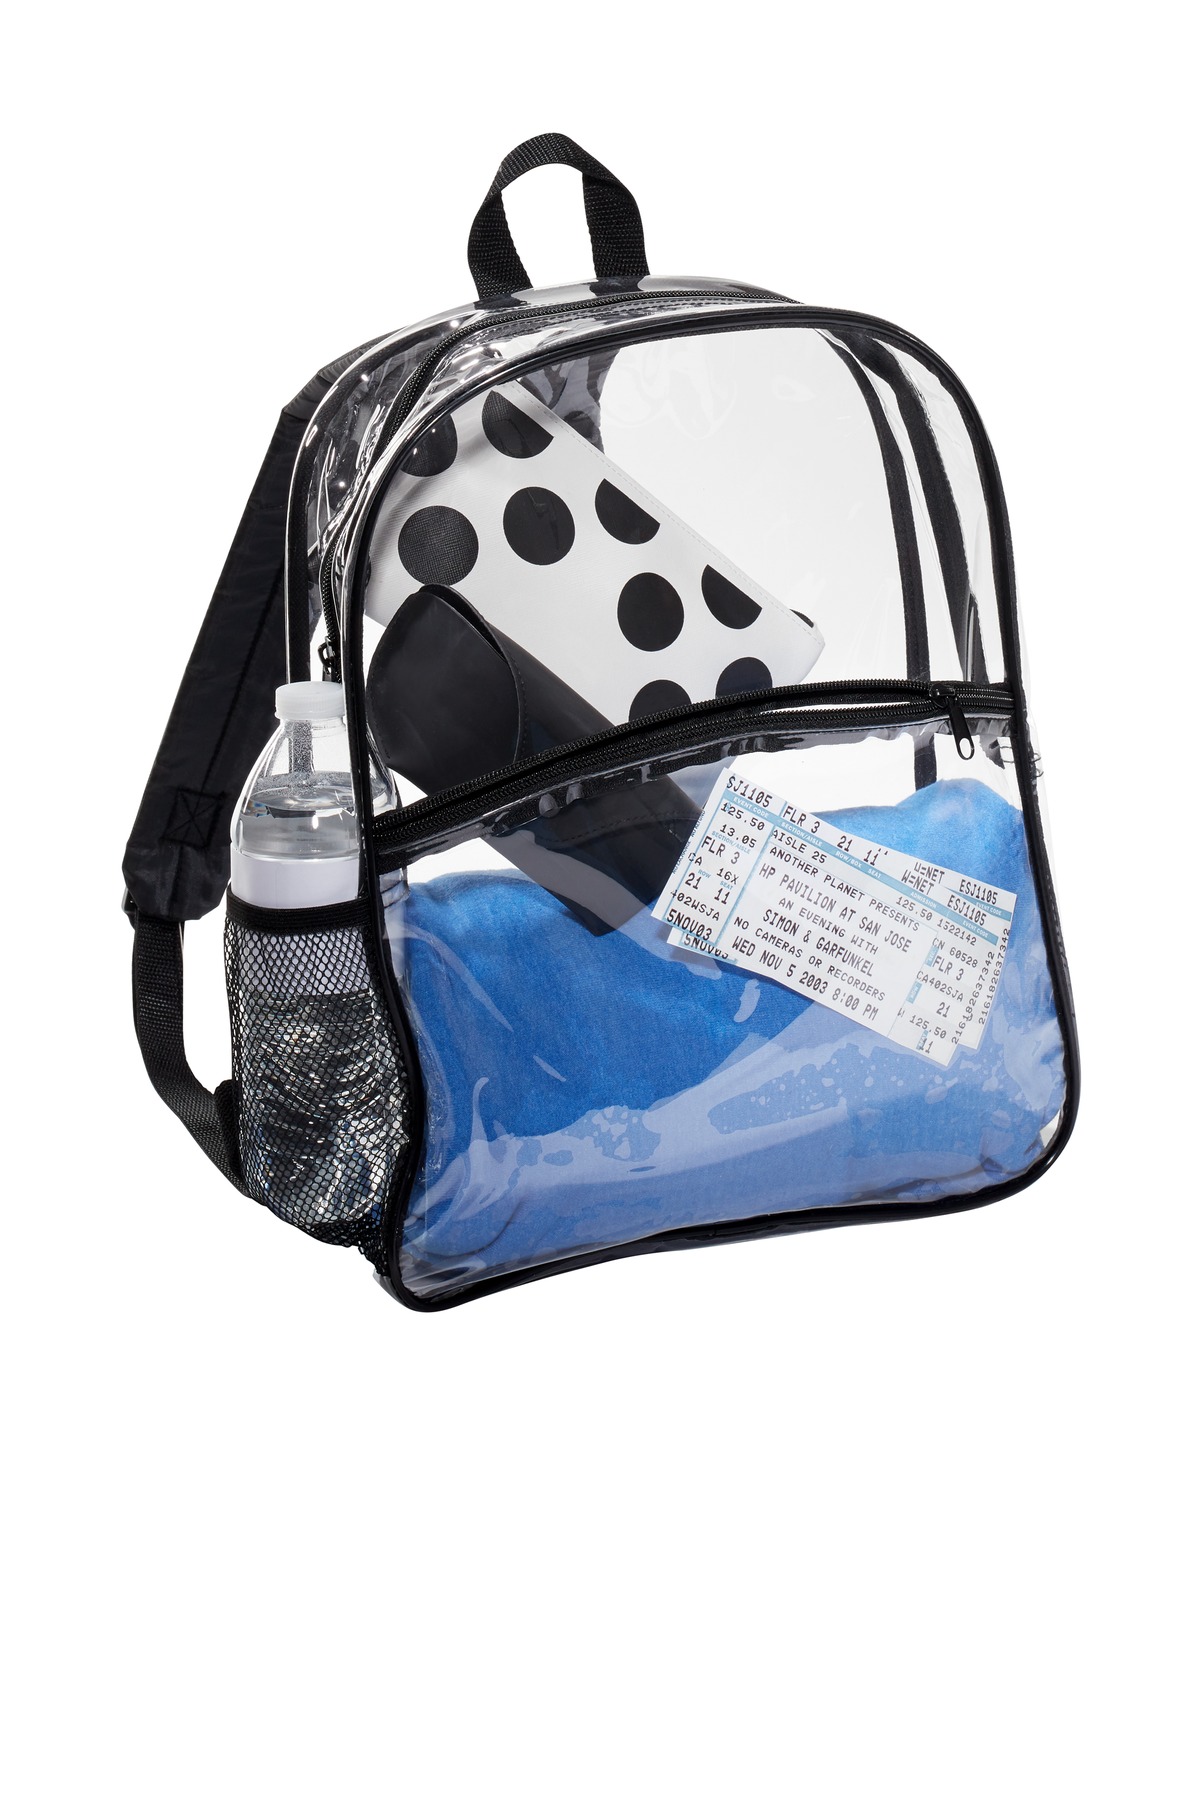 Port Authority Adult Unisex Clear Backpack Clear/Black One Size Fits All - image 2 of 3